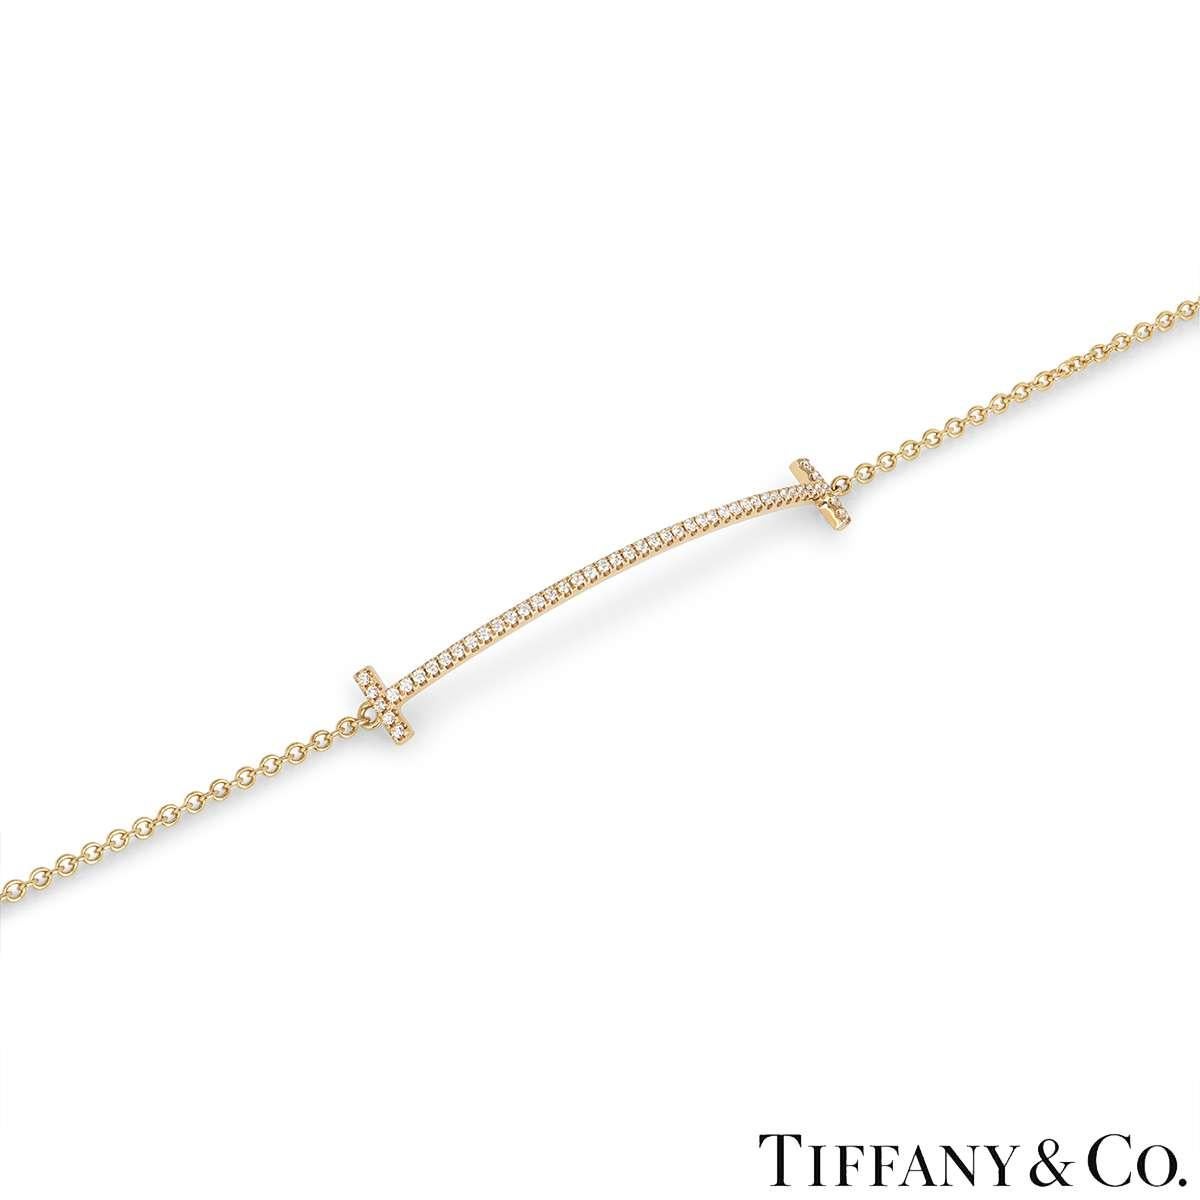 A delicate 18k rose gold diamond bracelet by Tiffany & Co. from the Tiffany T collection. The bracelet comprises of a curved design with the iconic Tiffany T at either end set to the centre and finishes with an adjustable trace chain and lobster